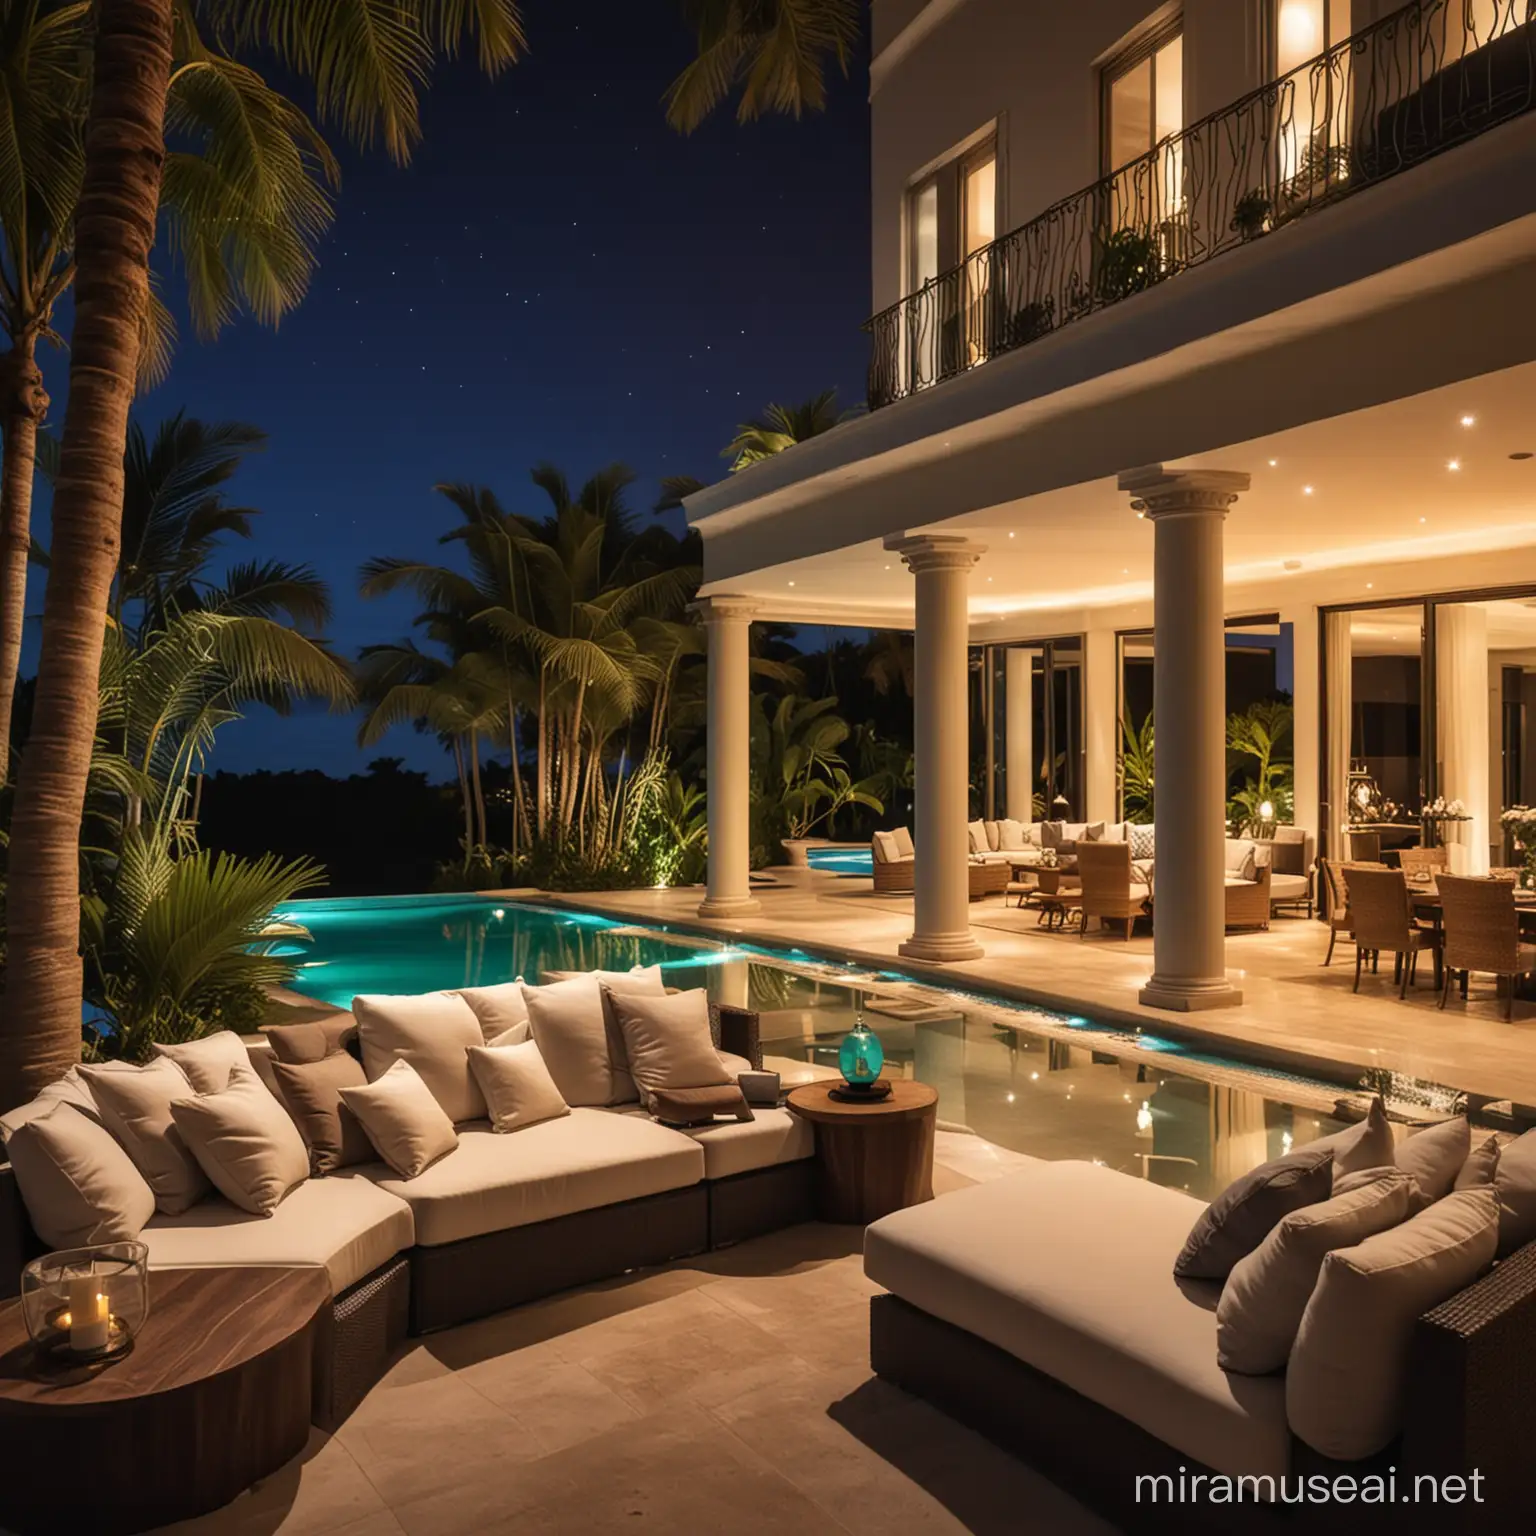 luxury mansion, inside view of lounge, in a tropical Lanscape at night 